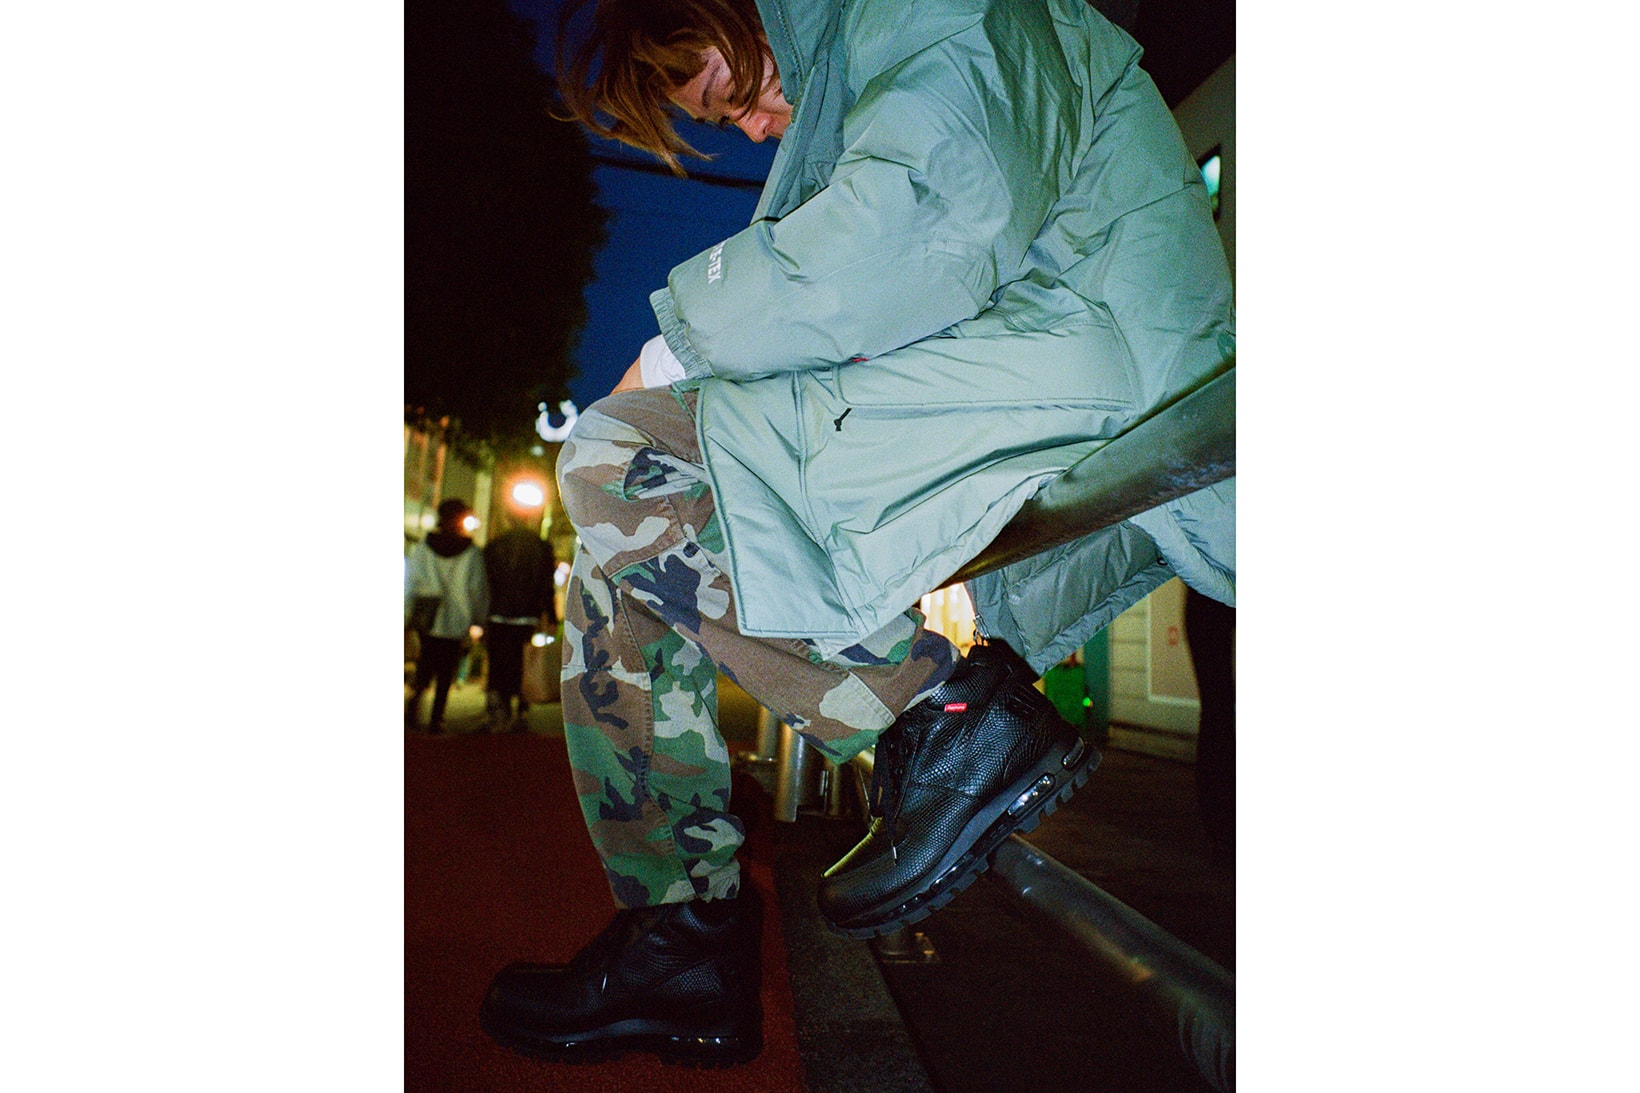 supreme nike goadome collaboration boots footwear shoes snakeskin black colorway camo pants olive green jacket outerwear